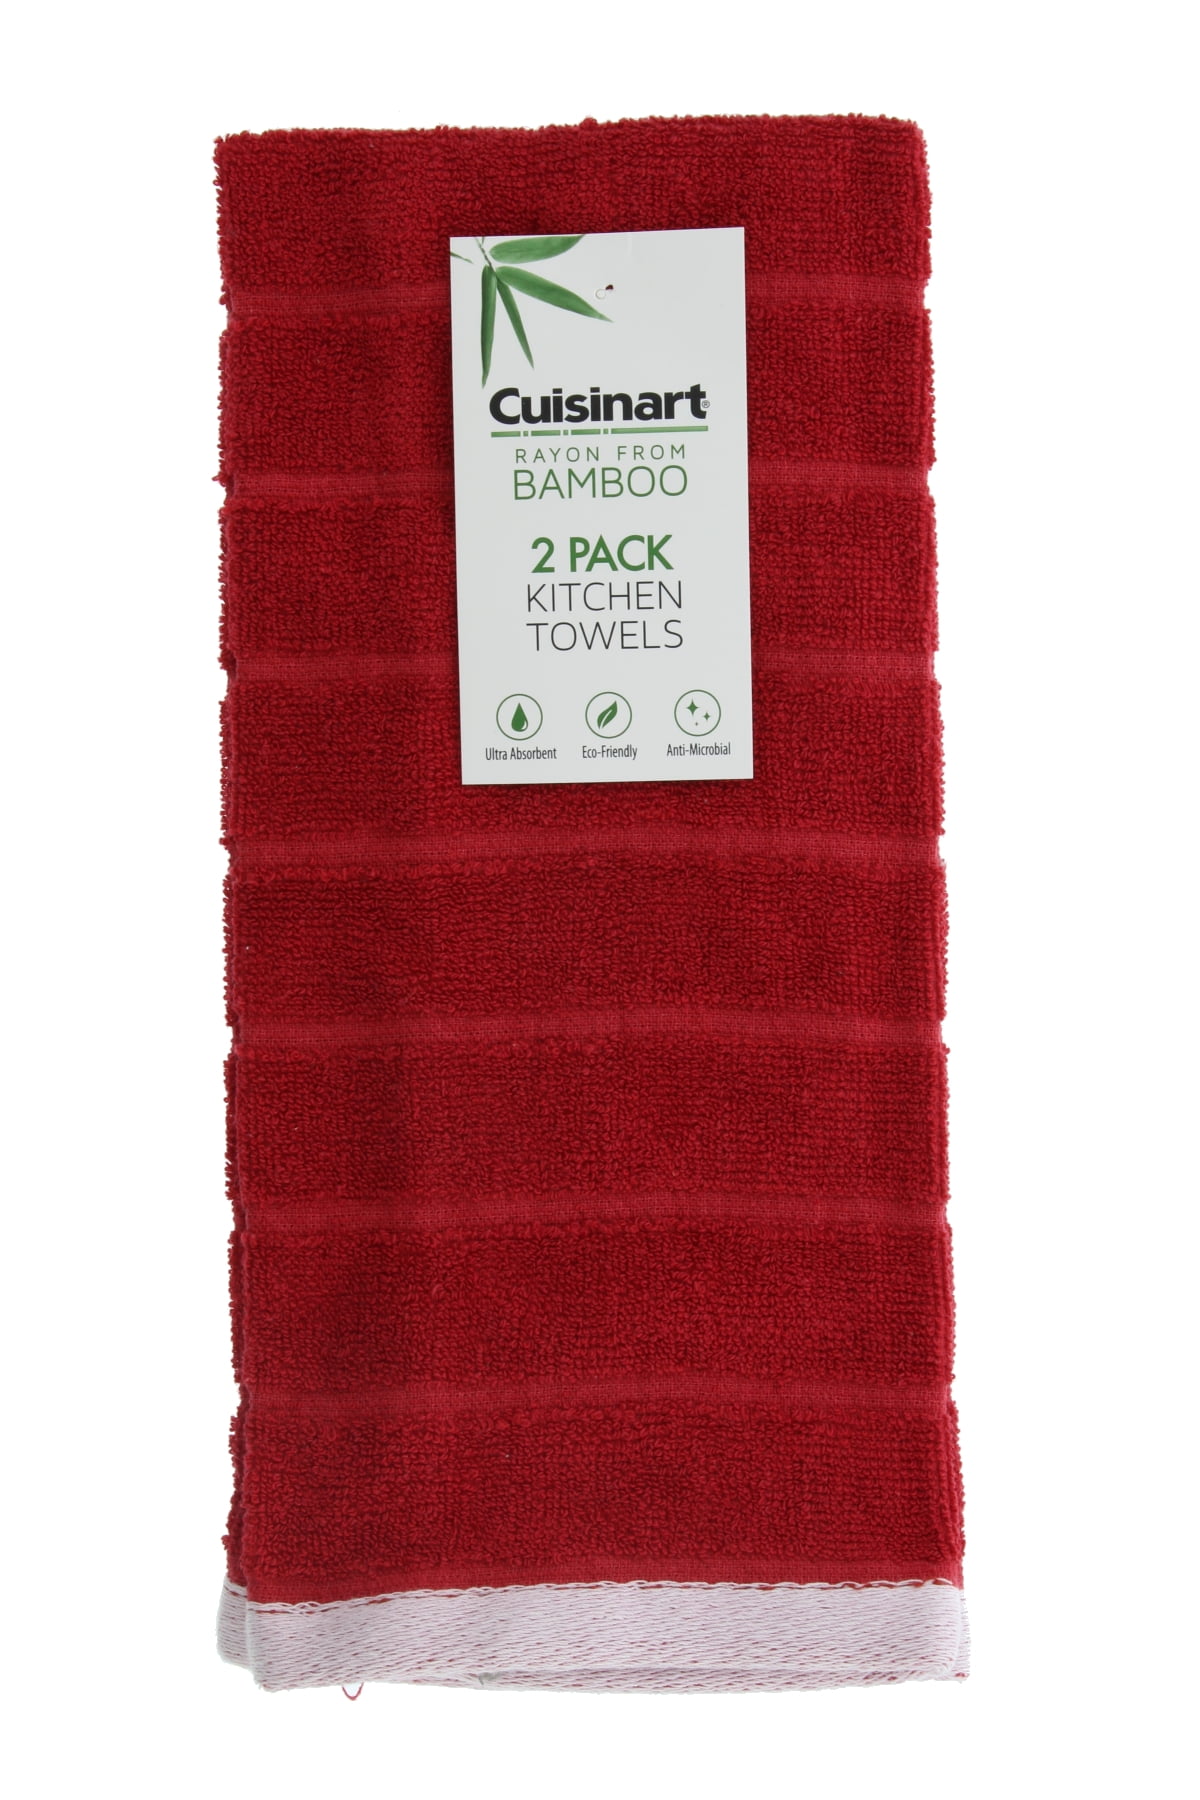 CUISINART 2 PACK KITCHEN TOWELS RED CHECK GRAY STRIPE 16 X 28 COTTON NIP